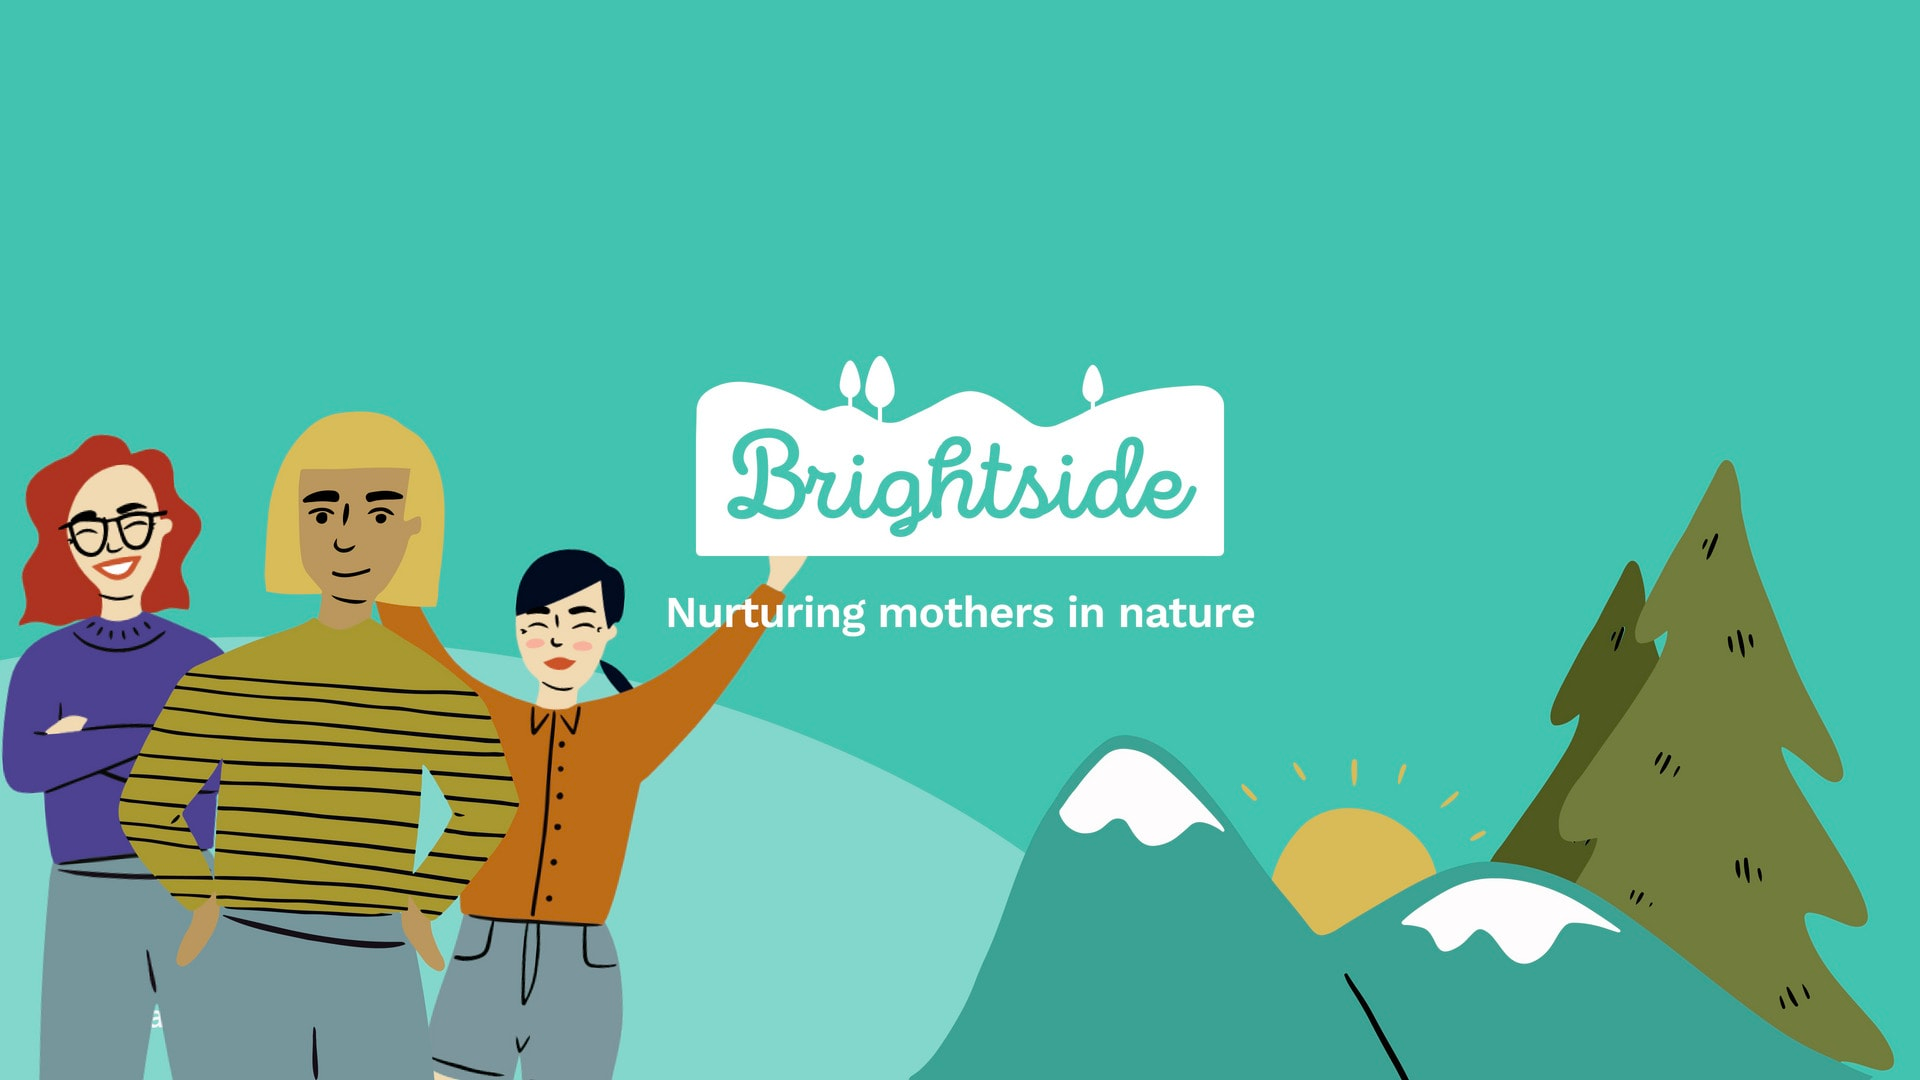 Poster with three female figures on the left, trees, a sun and mountain tops on the right, and a logo and text reading ‘Brightside nurturing mothers in nature’ in the middle, on a green background.